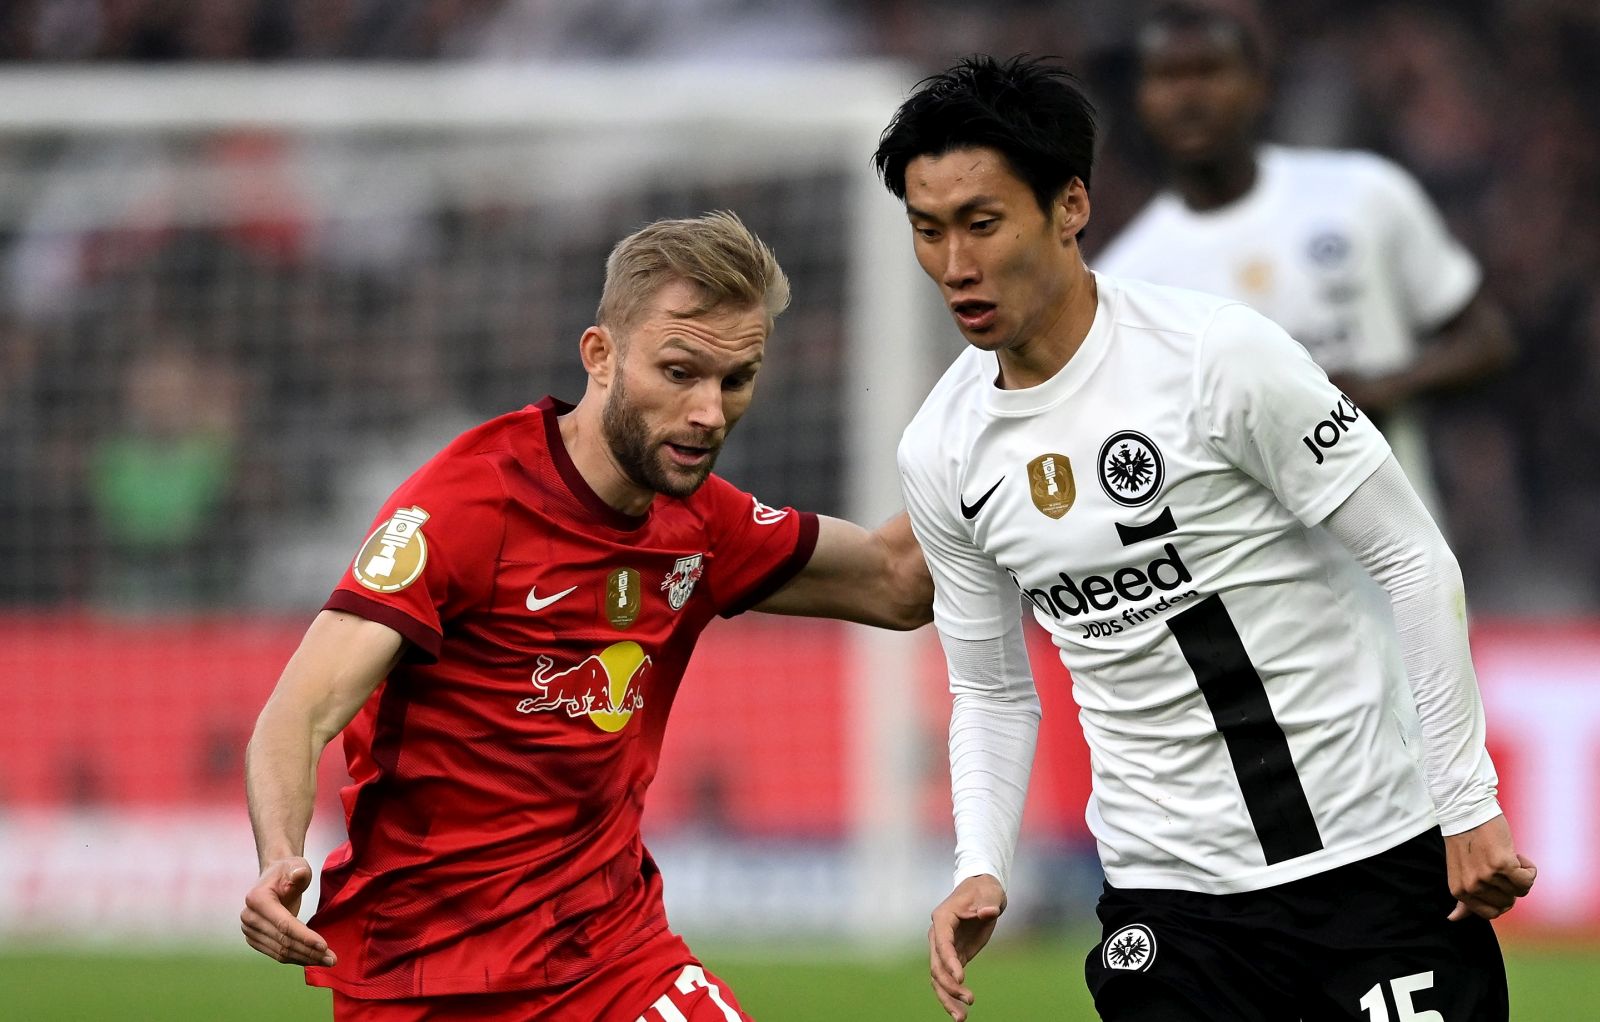 epa10671161 Konrad Laimer of RB Leipzig (R) in action with Daichi Kamada of Eintracht Frankfurt (C) during the DFB Pokal cup final soccer match between RB Leipzig and Eintracht Frankfurt, in Berlin, Germany, 03 June 2023.  EPA/FILIP SINGER CONDITIONS - ATTENTION:  The DFB regulations prohibit any use of photographs as image sequences and/or quasi-video.